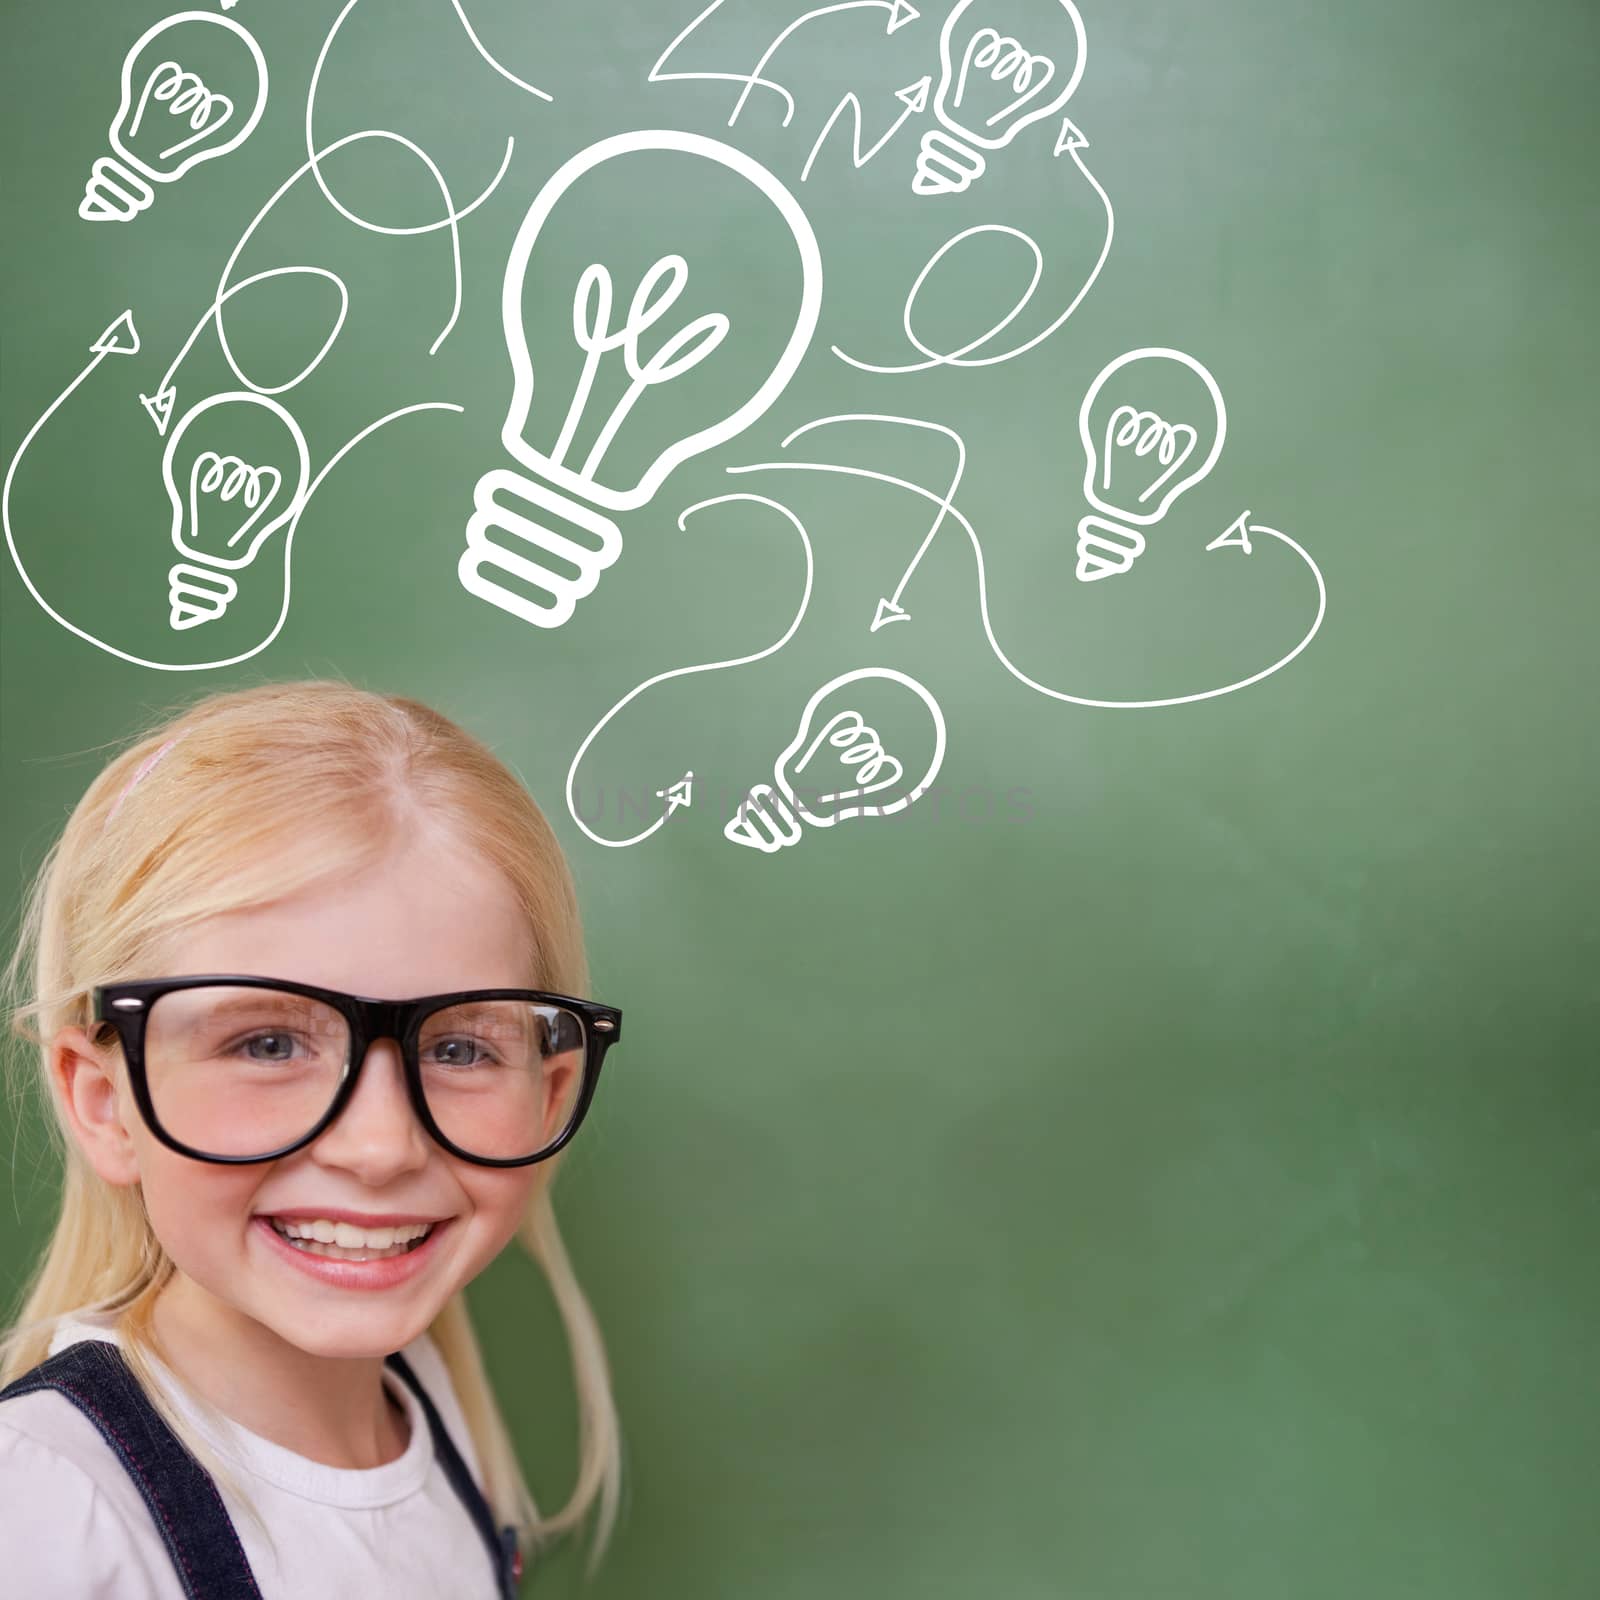 Cute pupil smiling against idea and innovation graphic